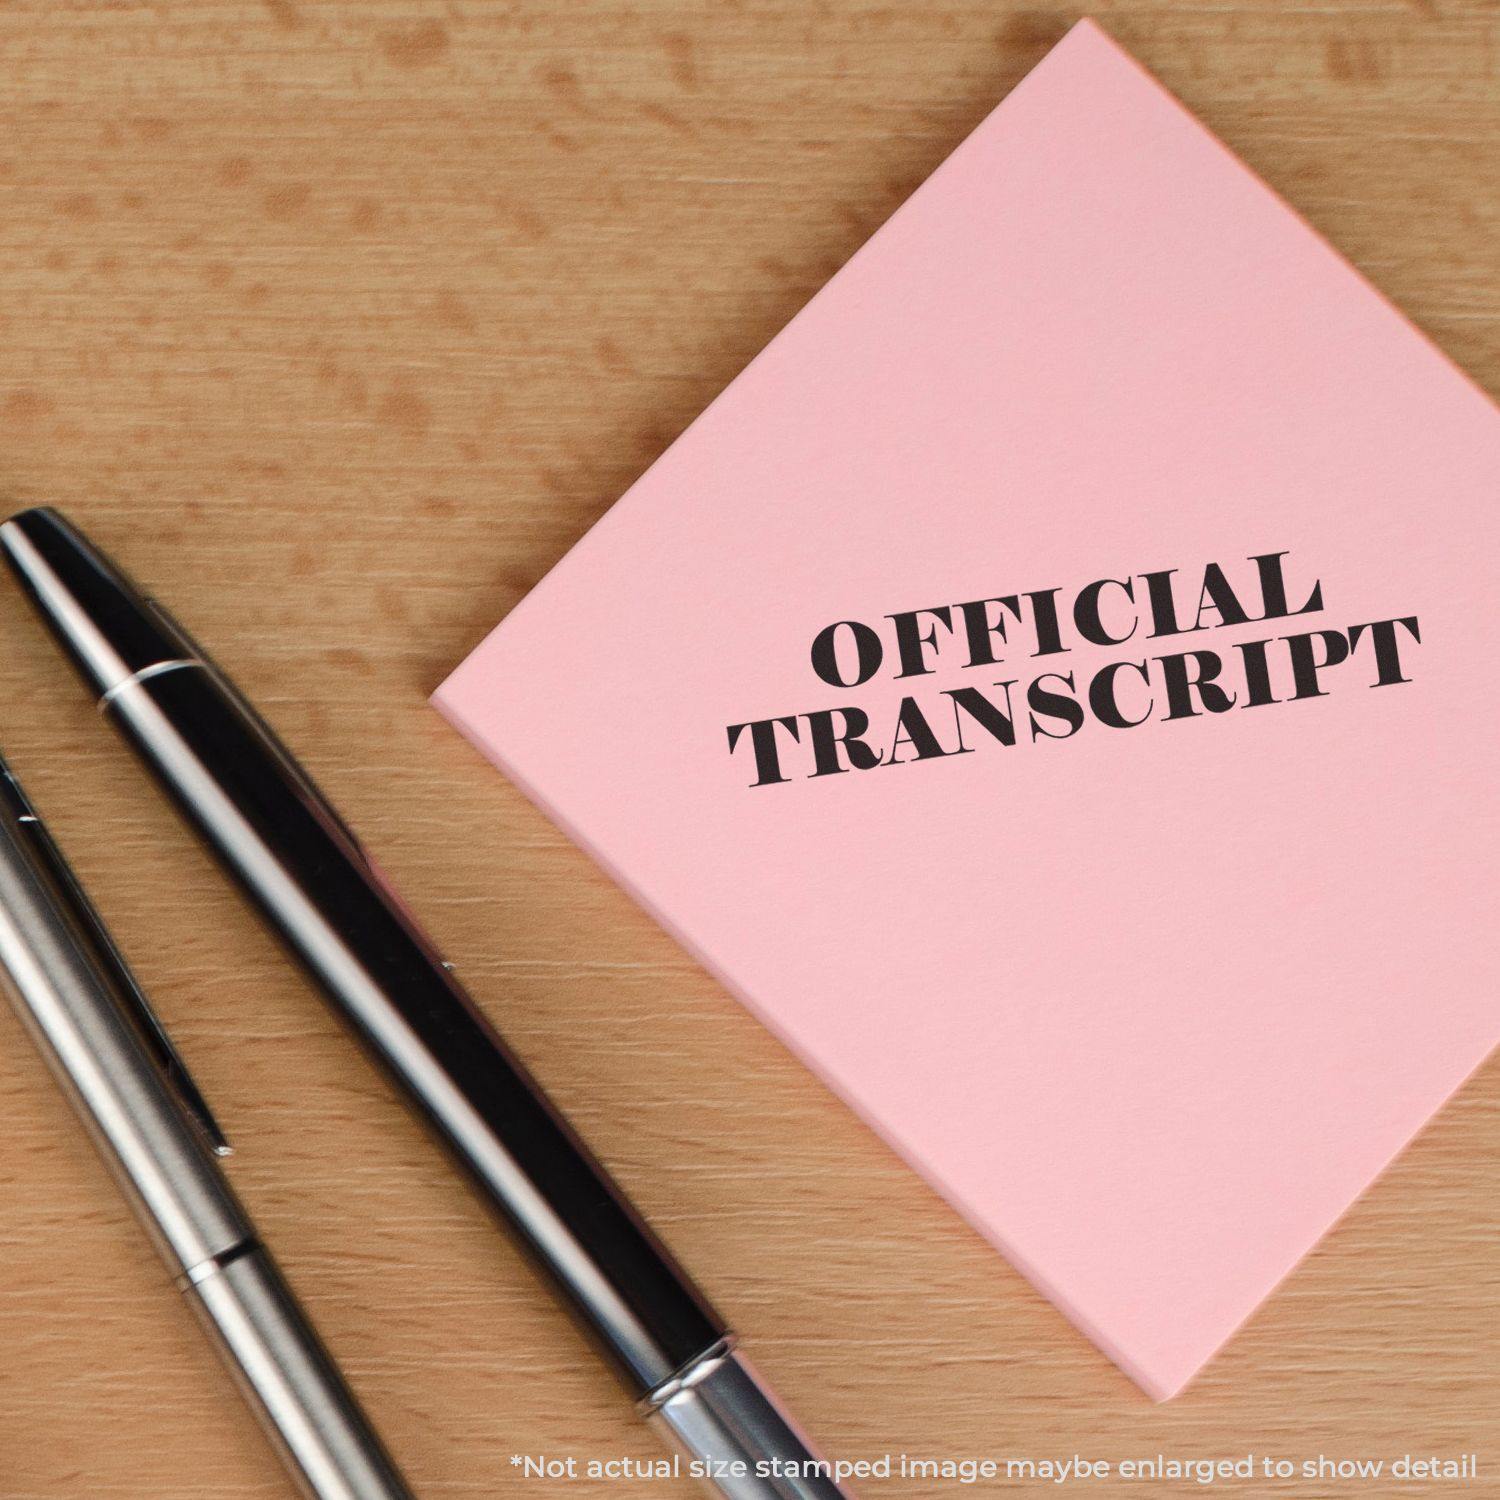 Large Official Transcript Rubber Stamp In Use Photo